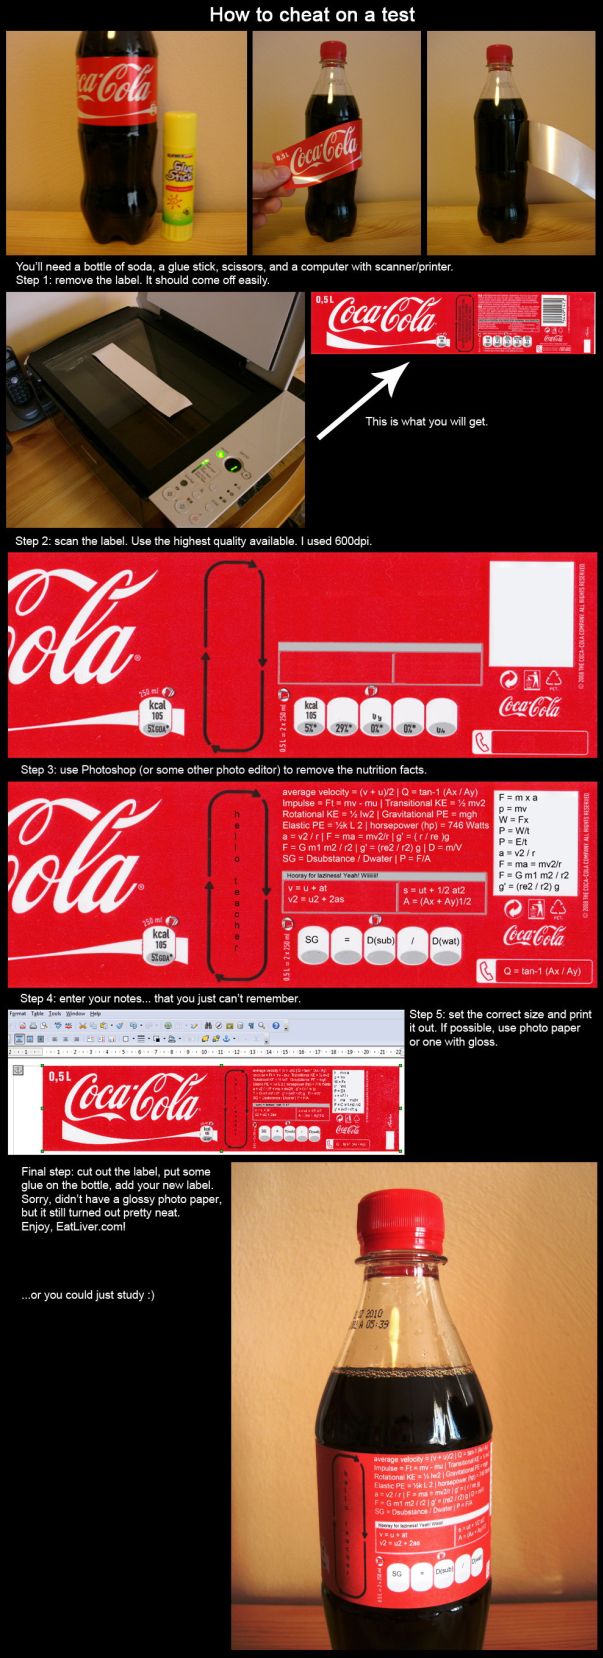 how to cheat on a test with a coke bottle